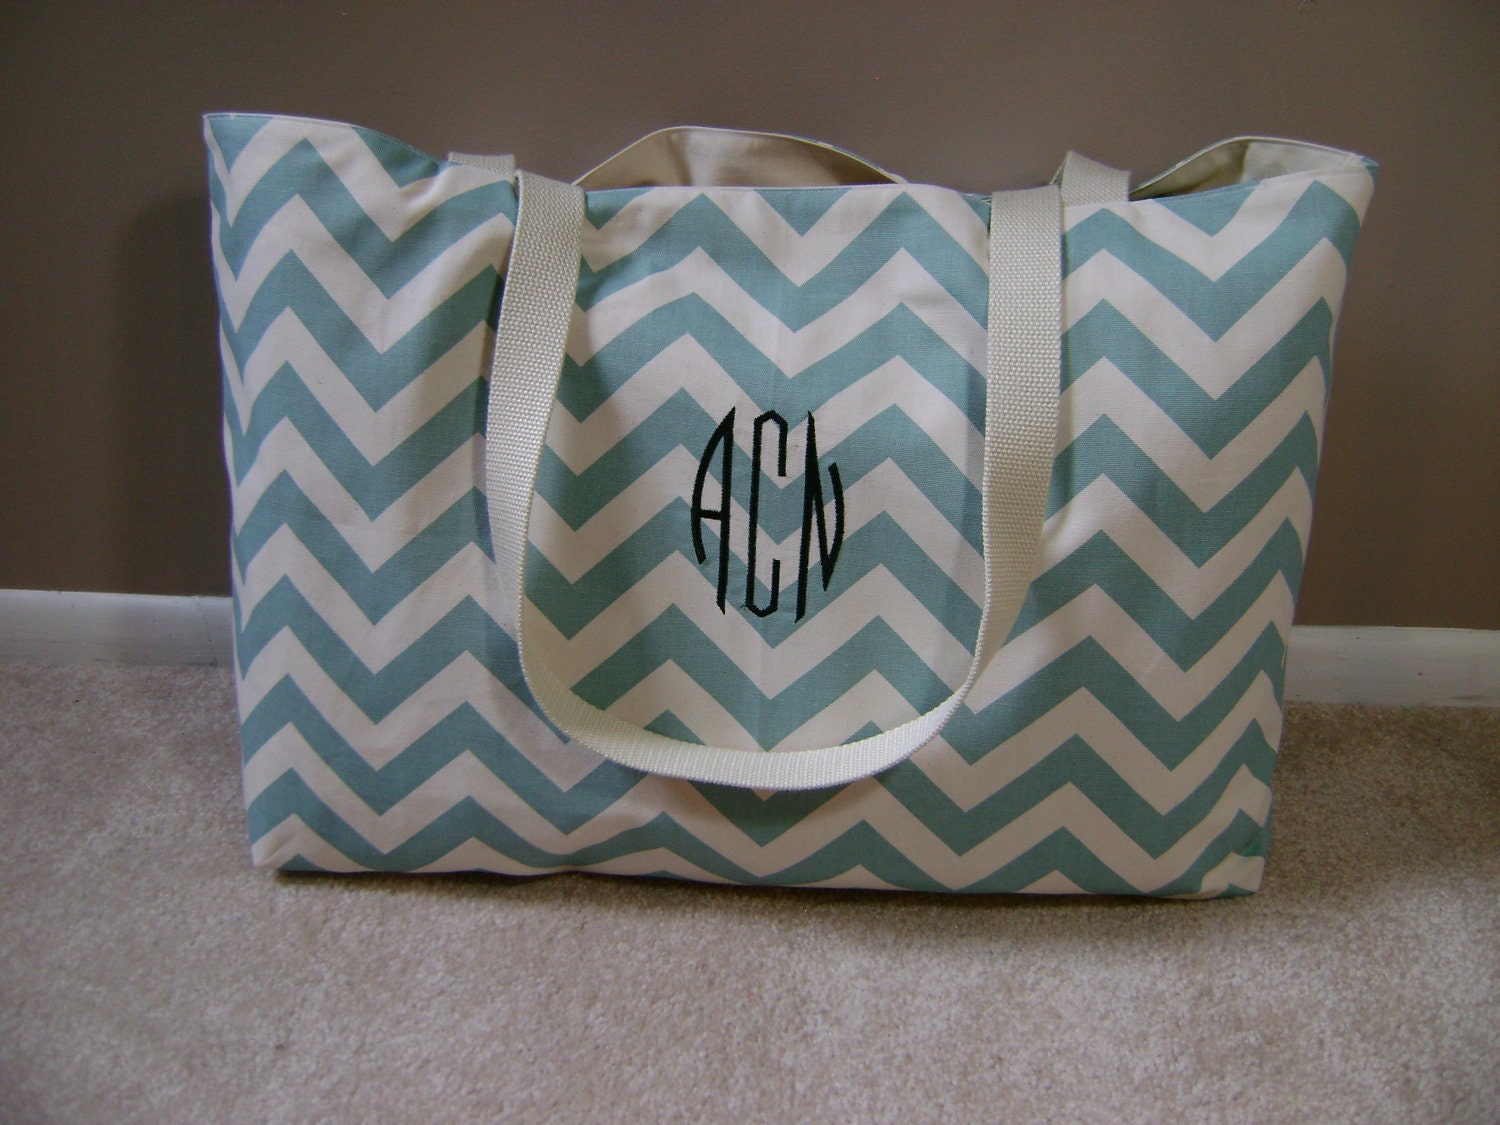 Nylon Tote Bags: Extra Large Monogrammed Beach Bags